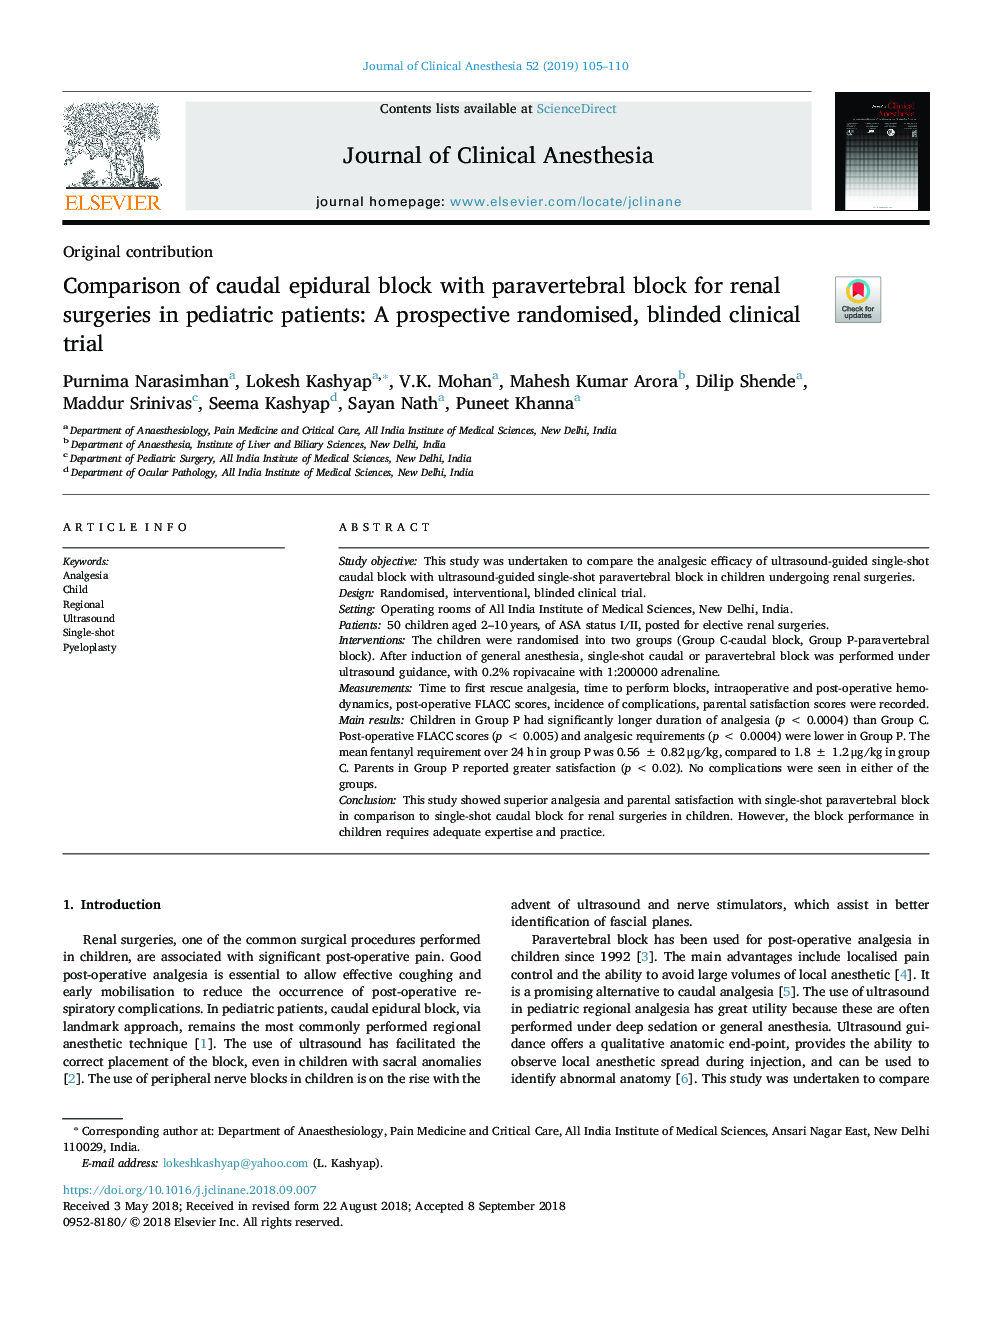 Comparison of caudal epidural block with paravertebral block for renal surgeries in pediatric patients: A prospective randomised, blinded clinical trial